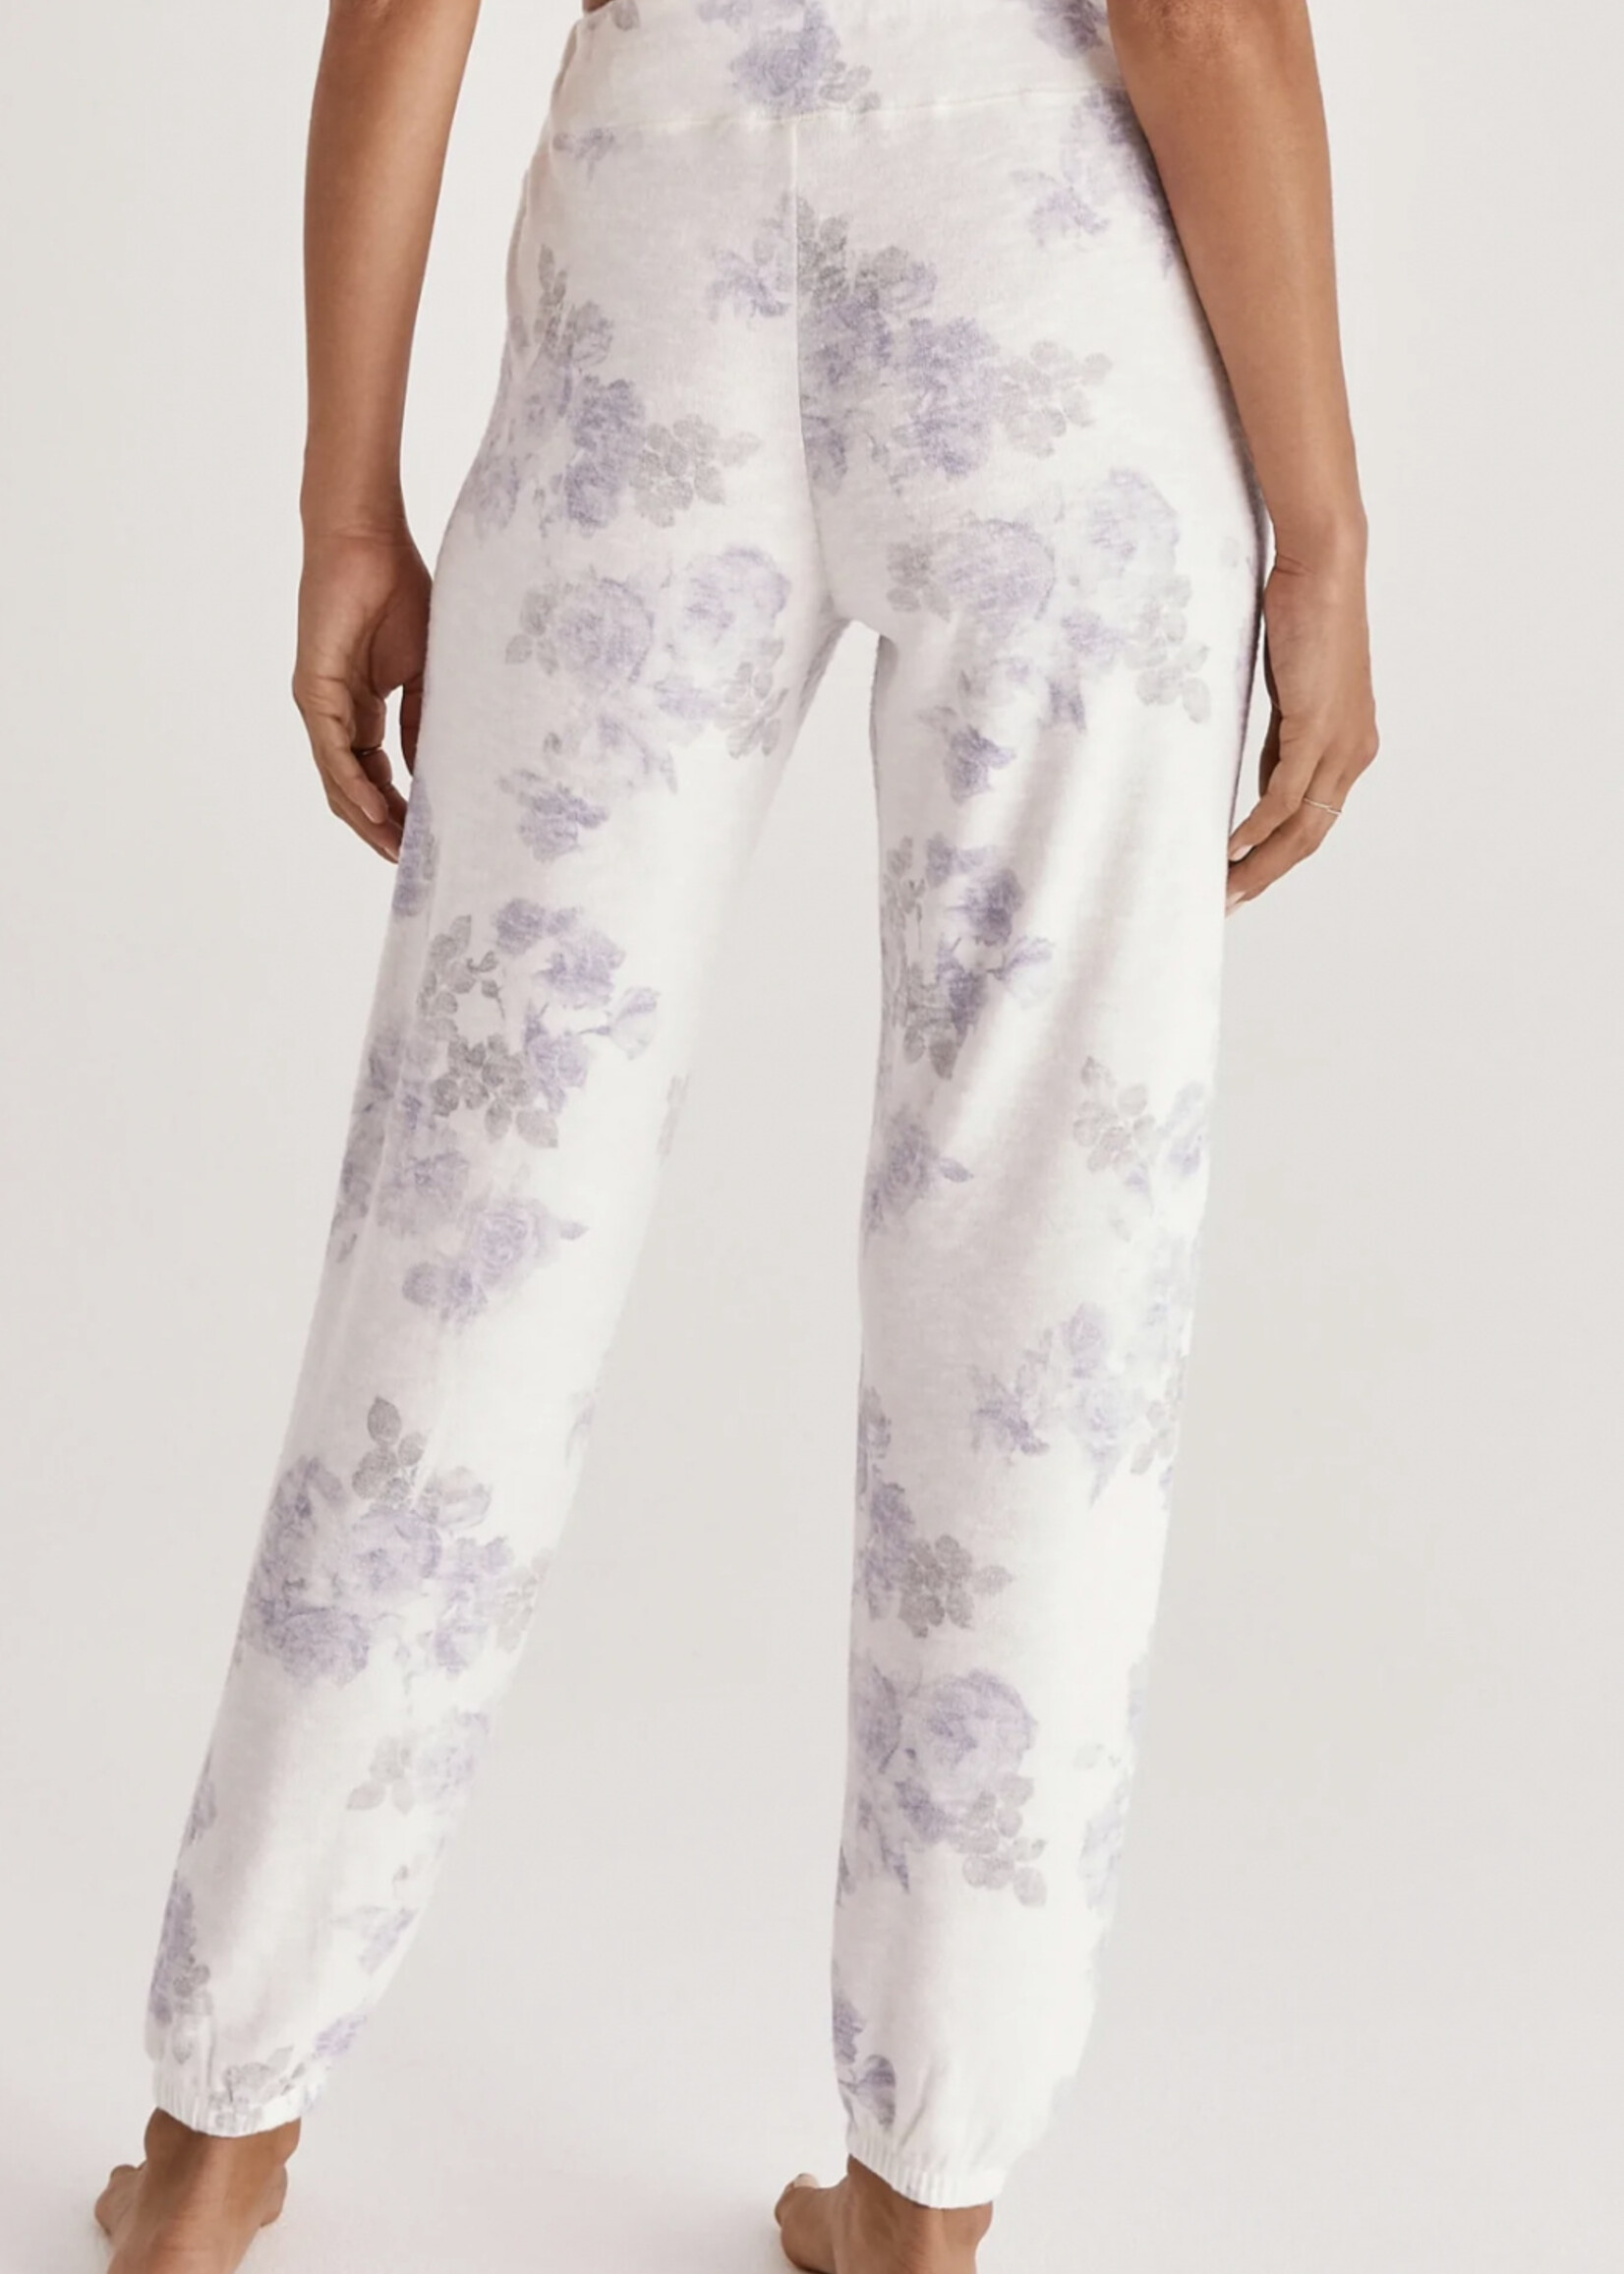 Z Supply Floral Jogger